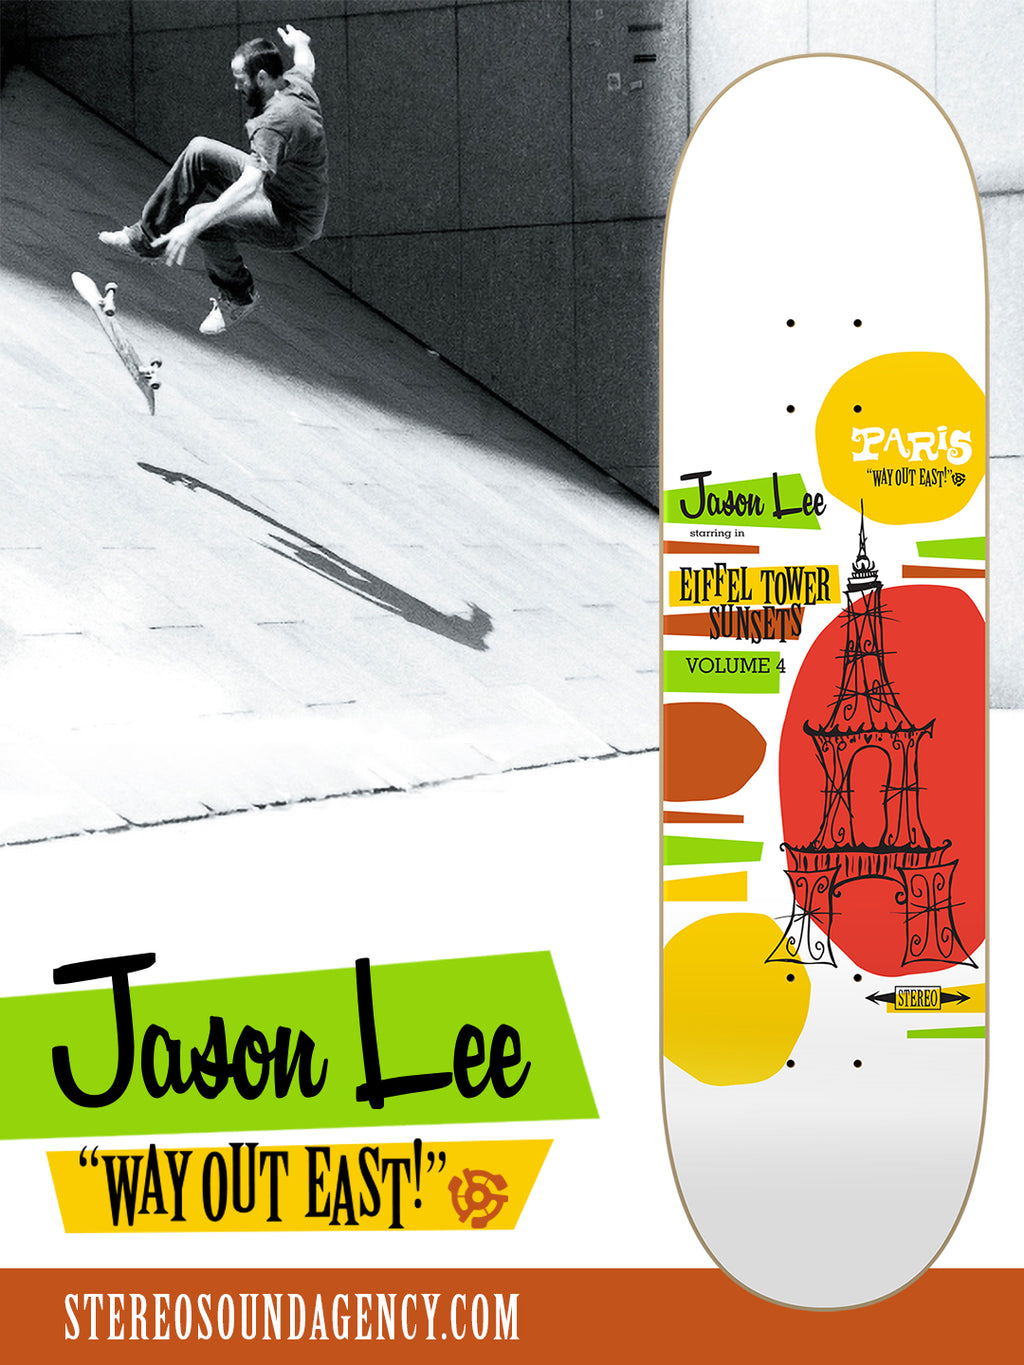 20th Anniversary : Jason Lee "Way Out East" 8.25"